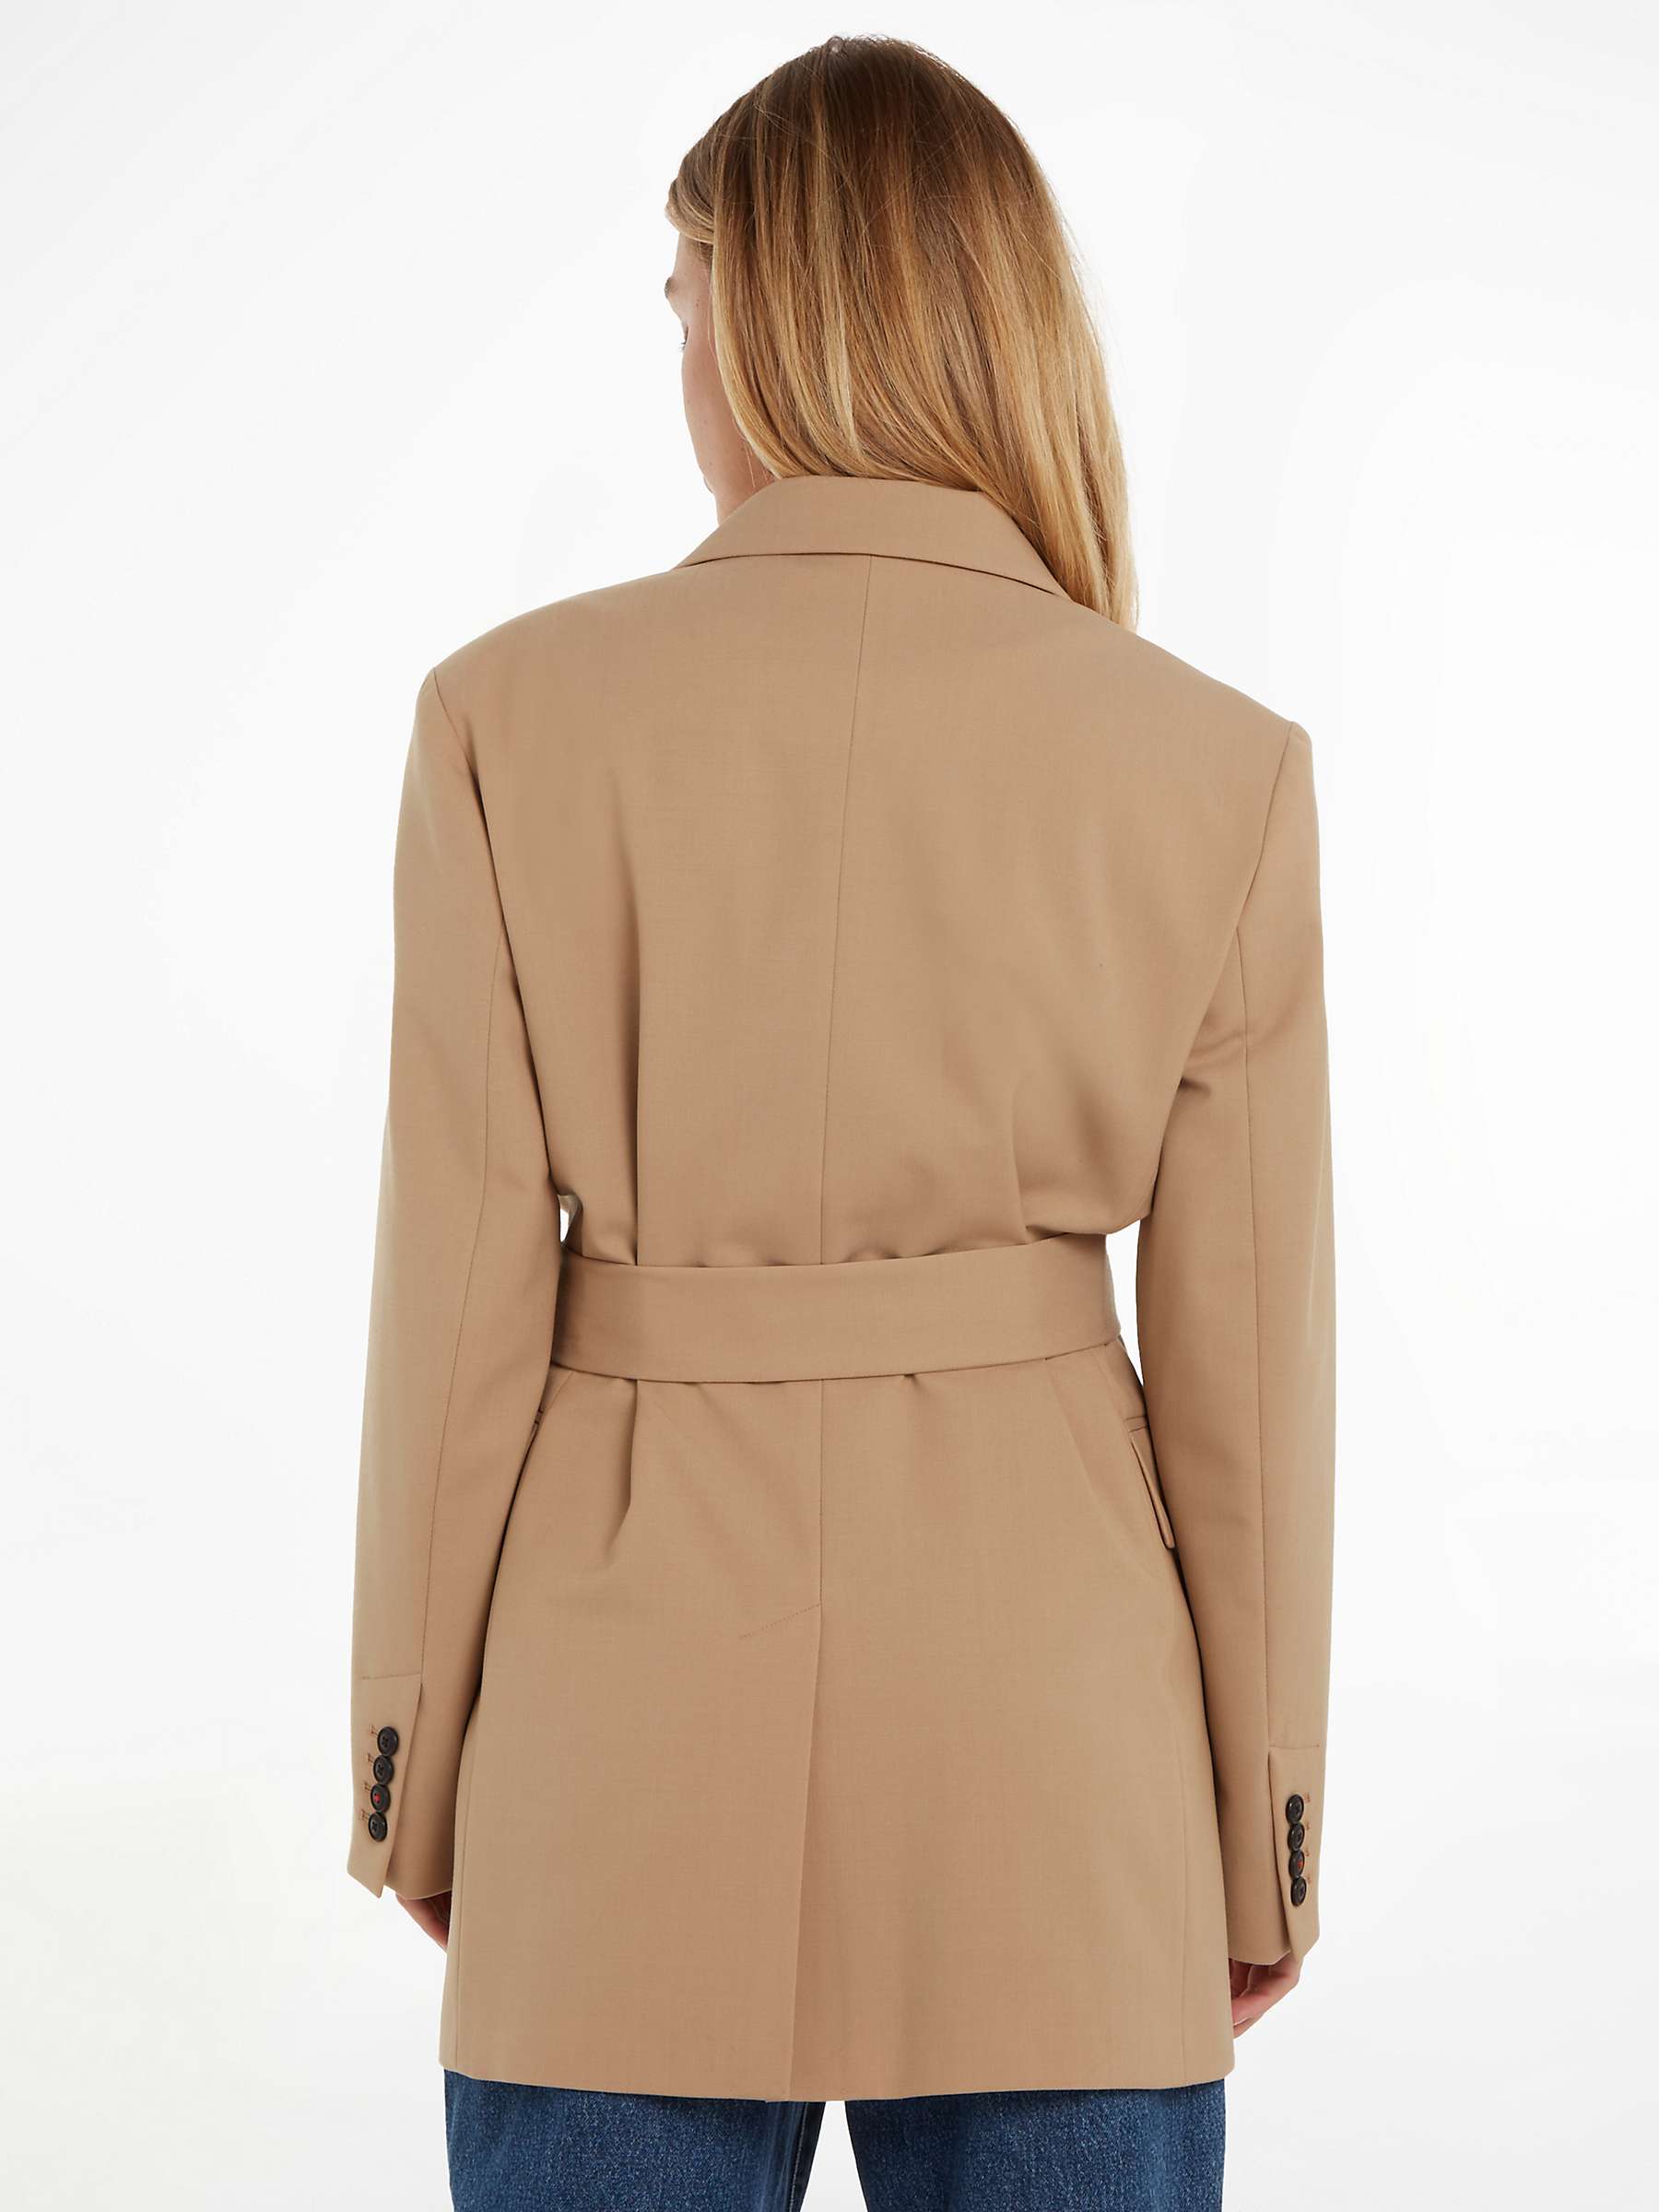 Buy Tommy Hilfiger Double Breasted Wool Blend Coat, Classic Beige Online at johnlewis.com